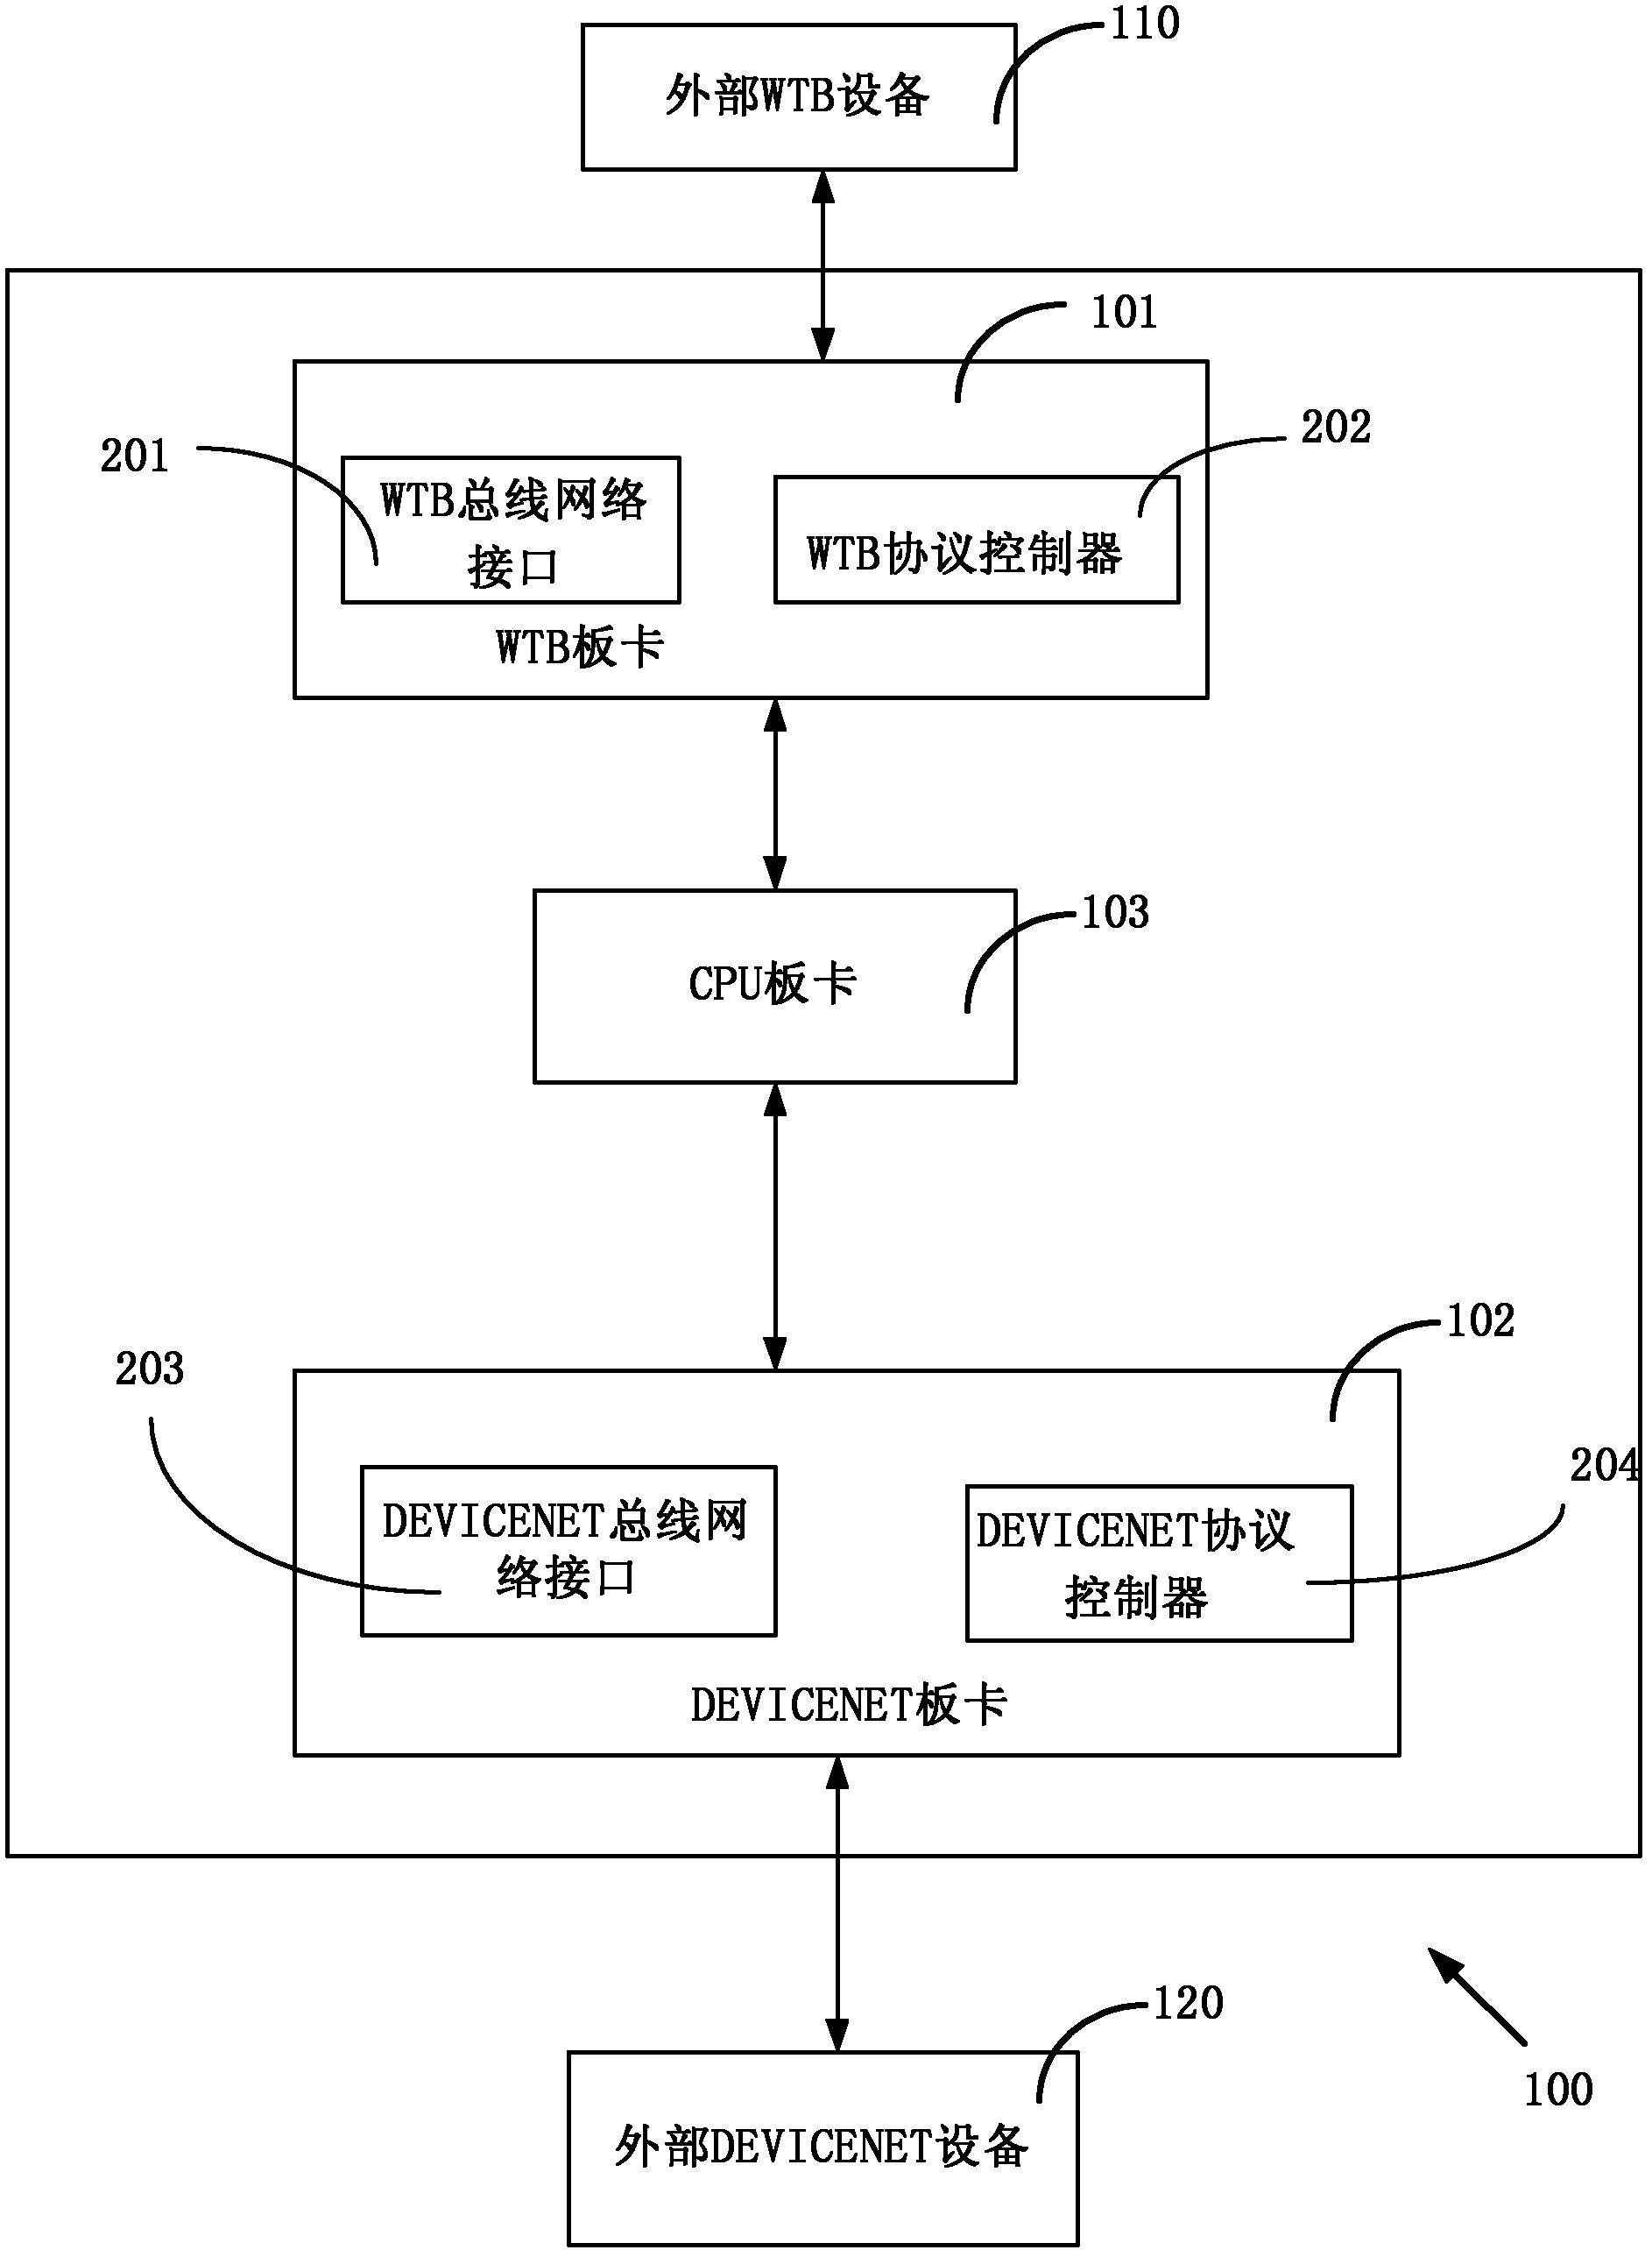 Communication device for rail transportation vehicle and method